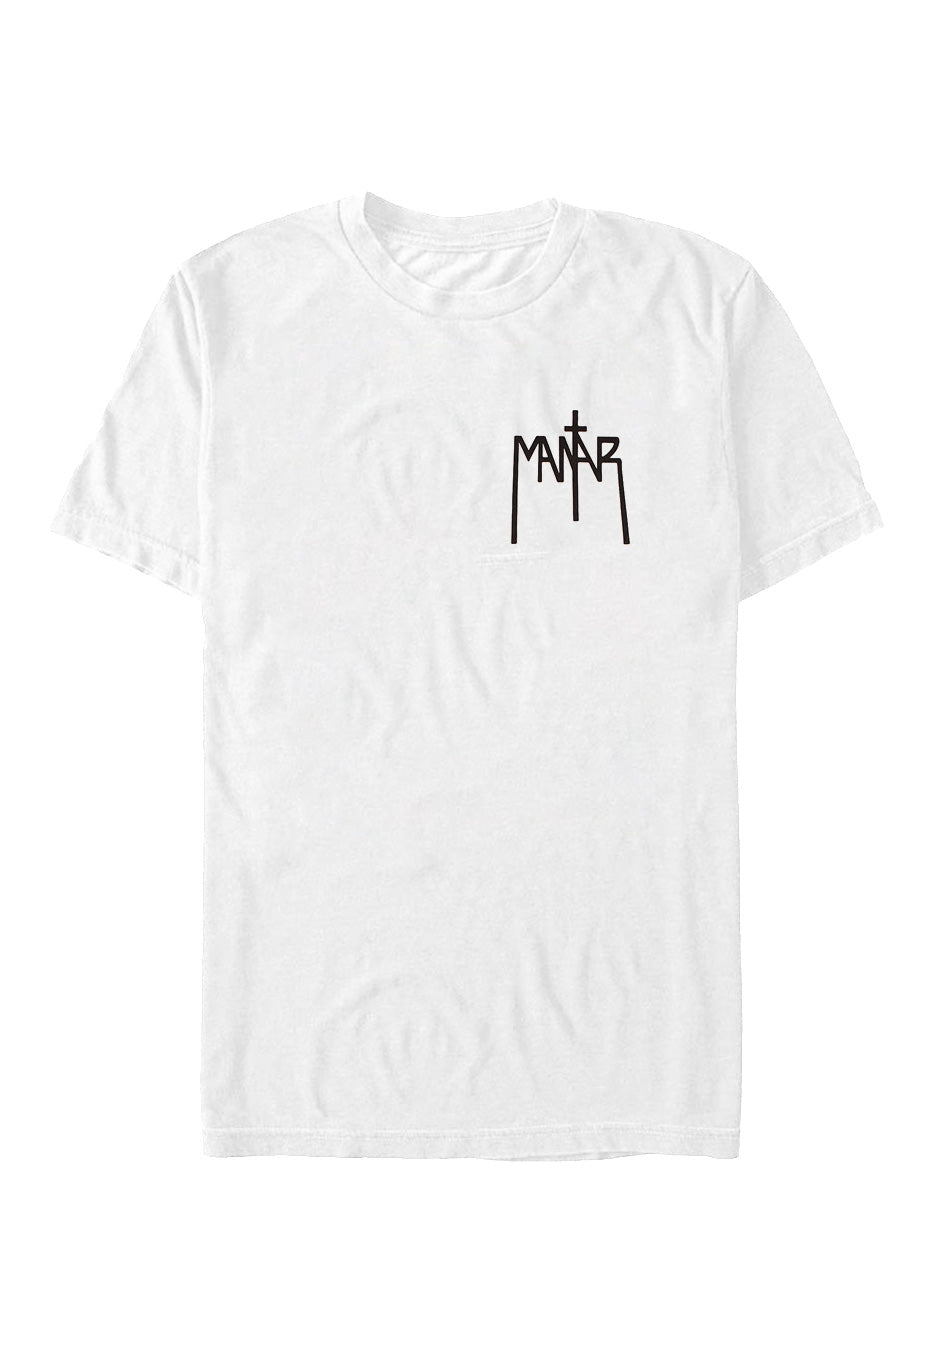 Mantar - Always Give Up White - T-Shirt